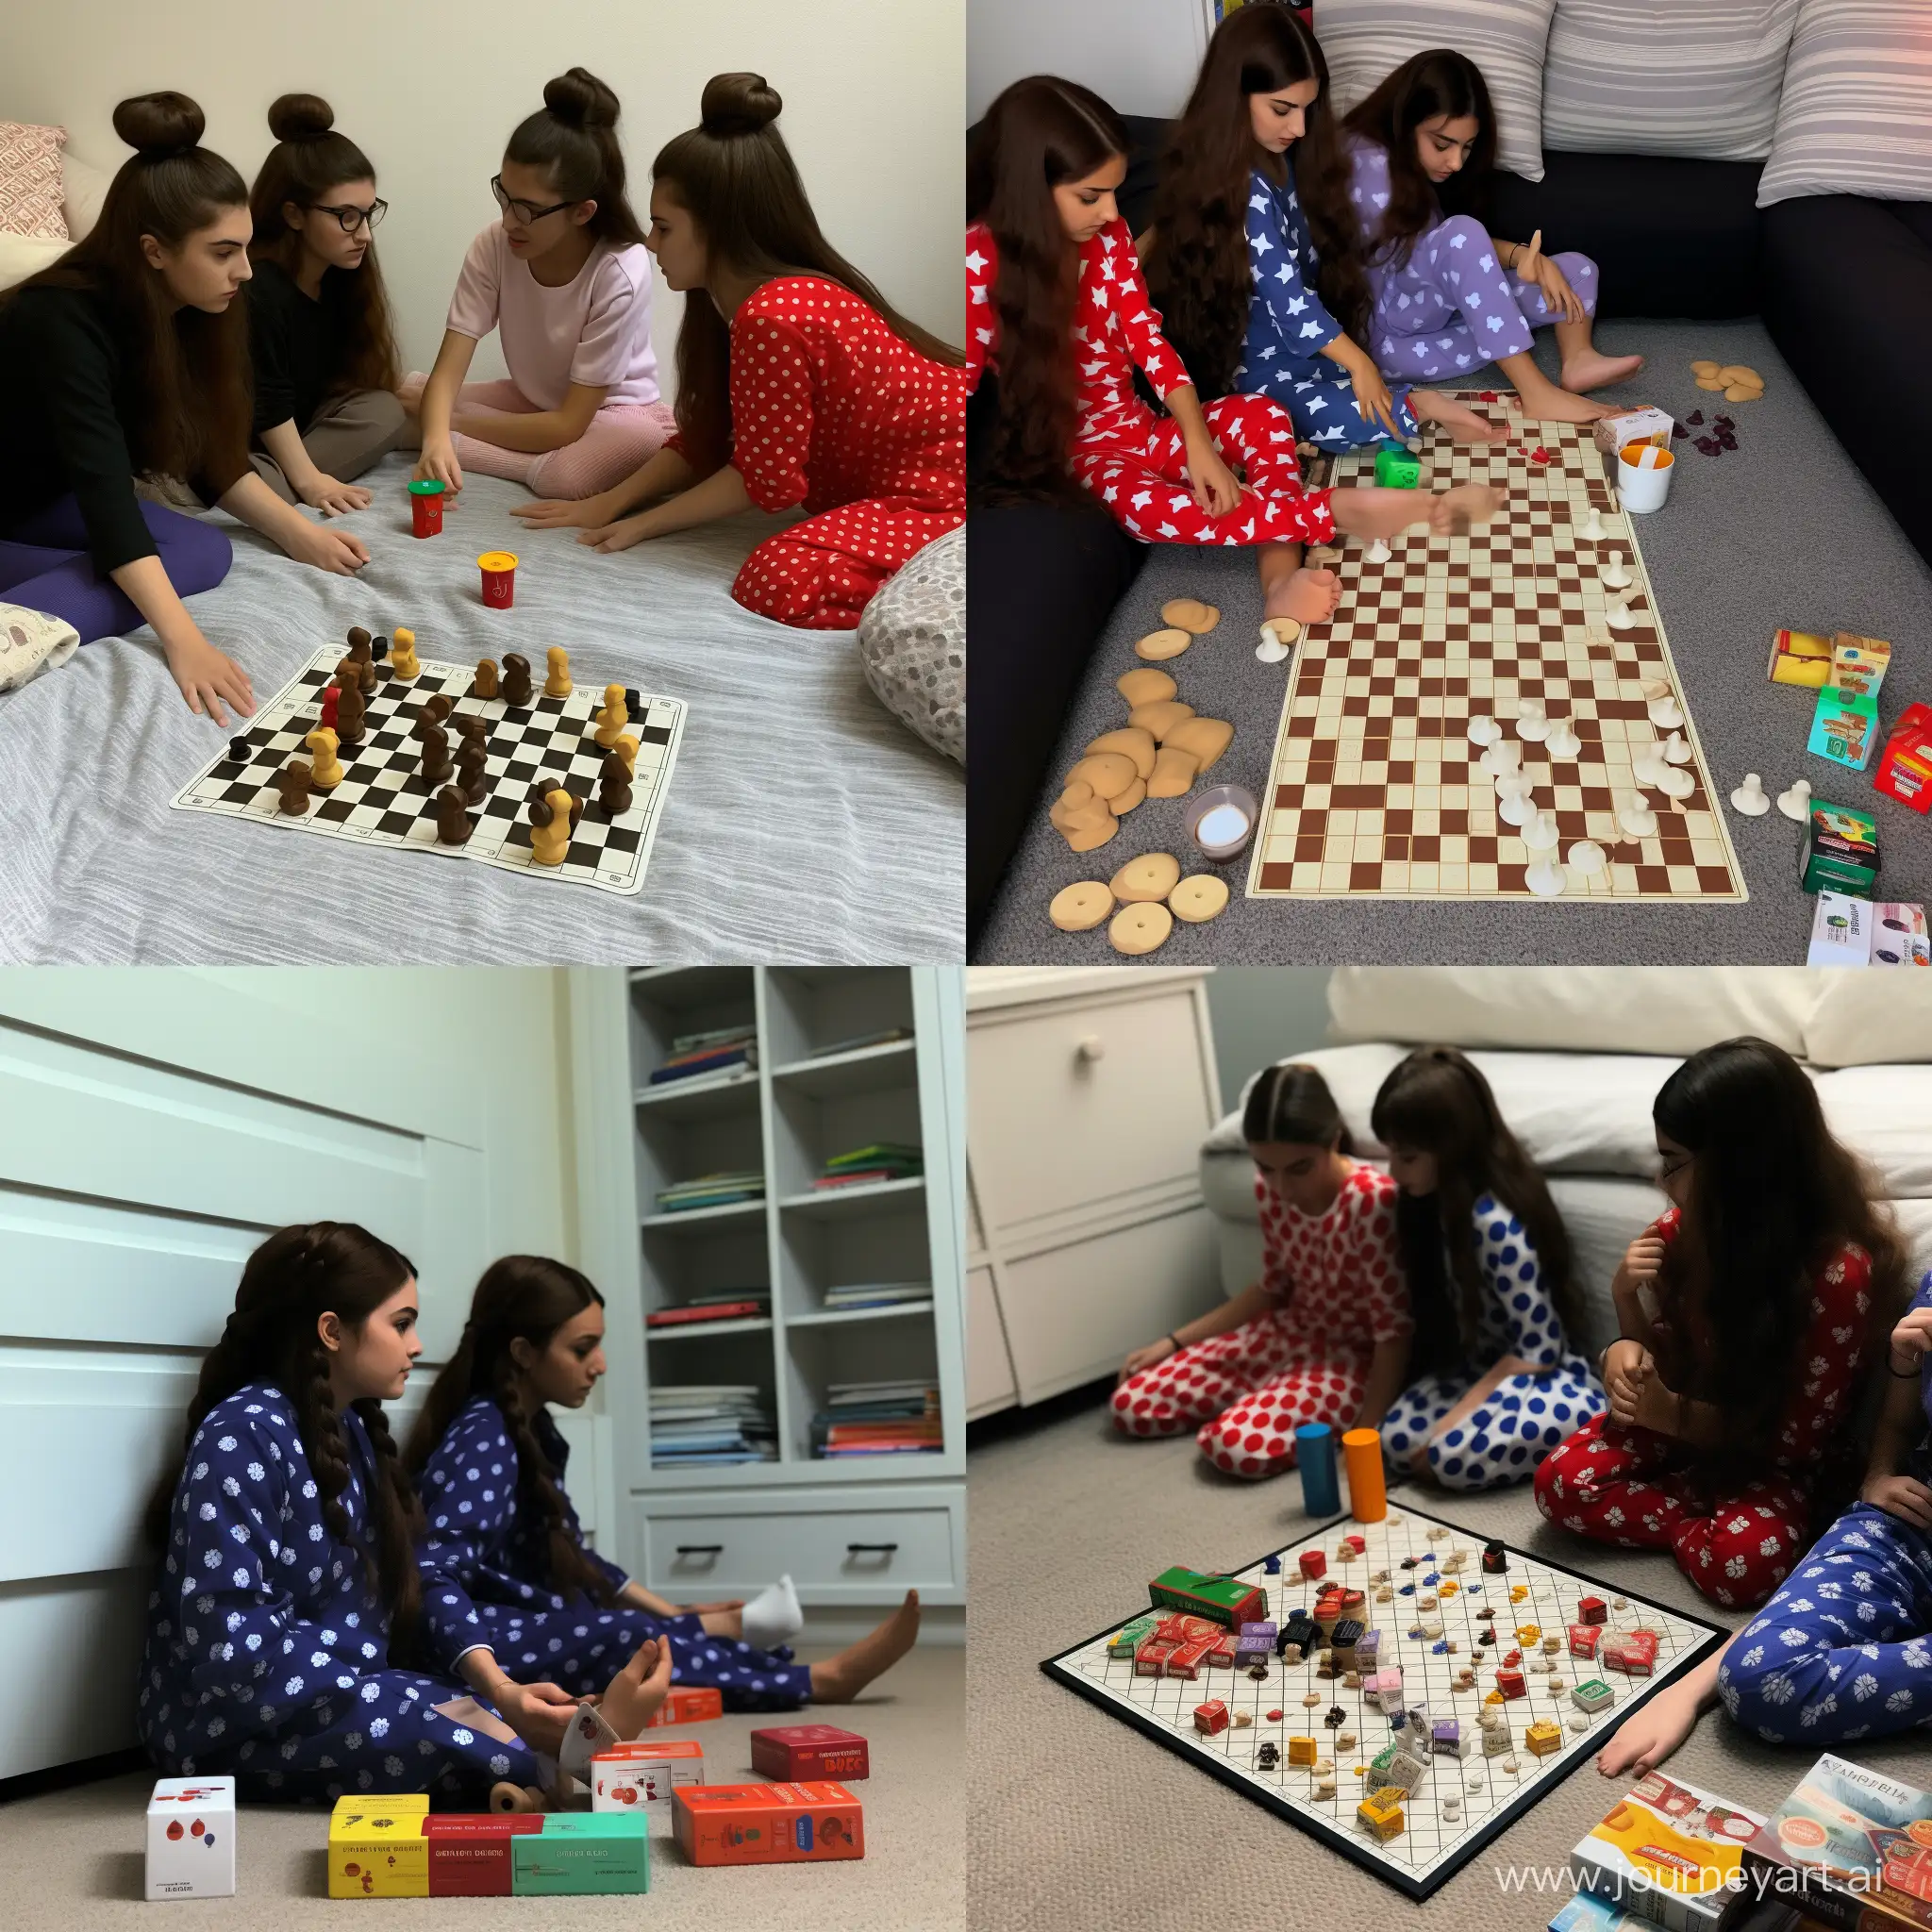 three girls came to a friend's sleepover after school, they are playing board games, wearing pyjamas with socks, socks visible on photo, photo made on iphone 12 and posted on instagram